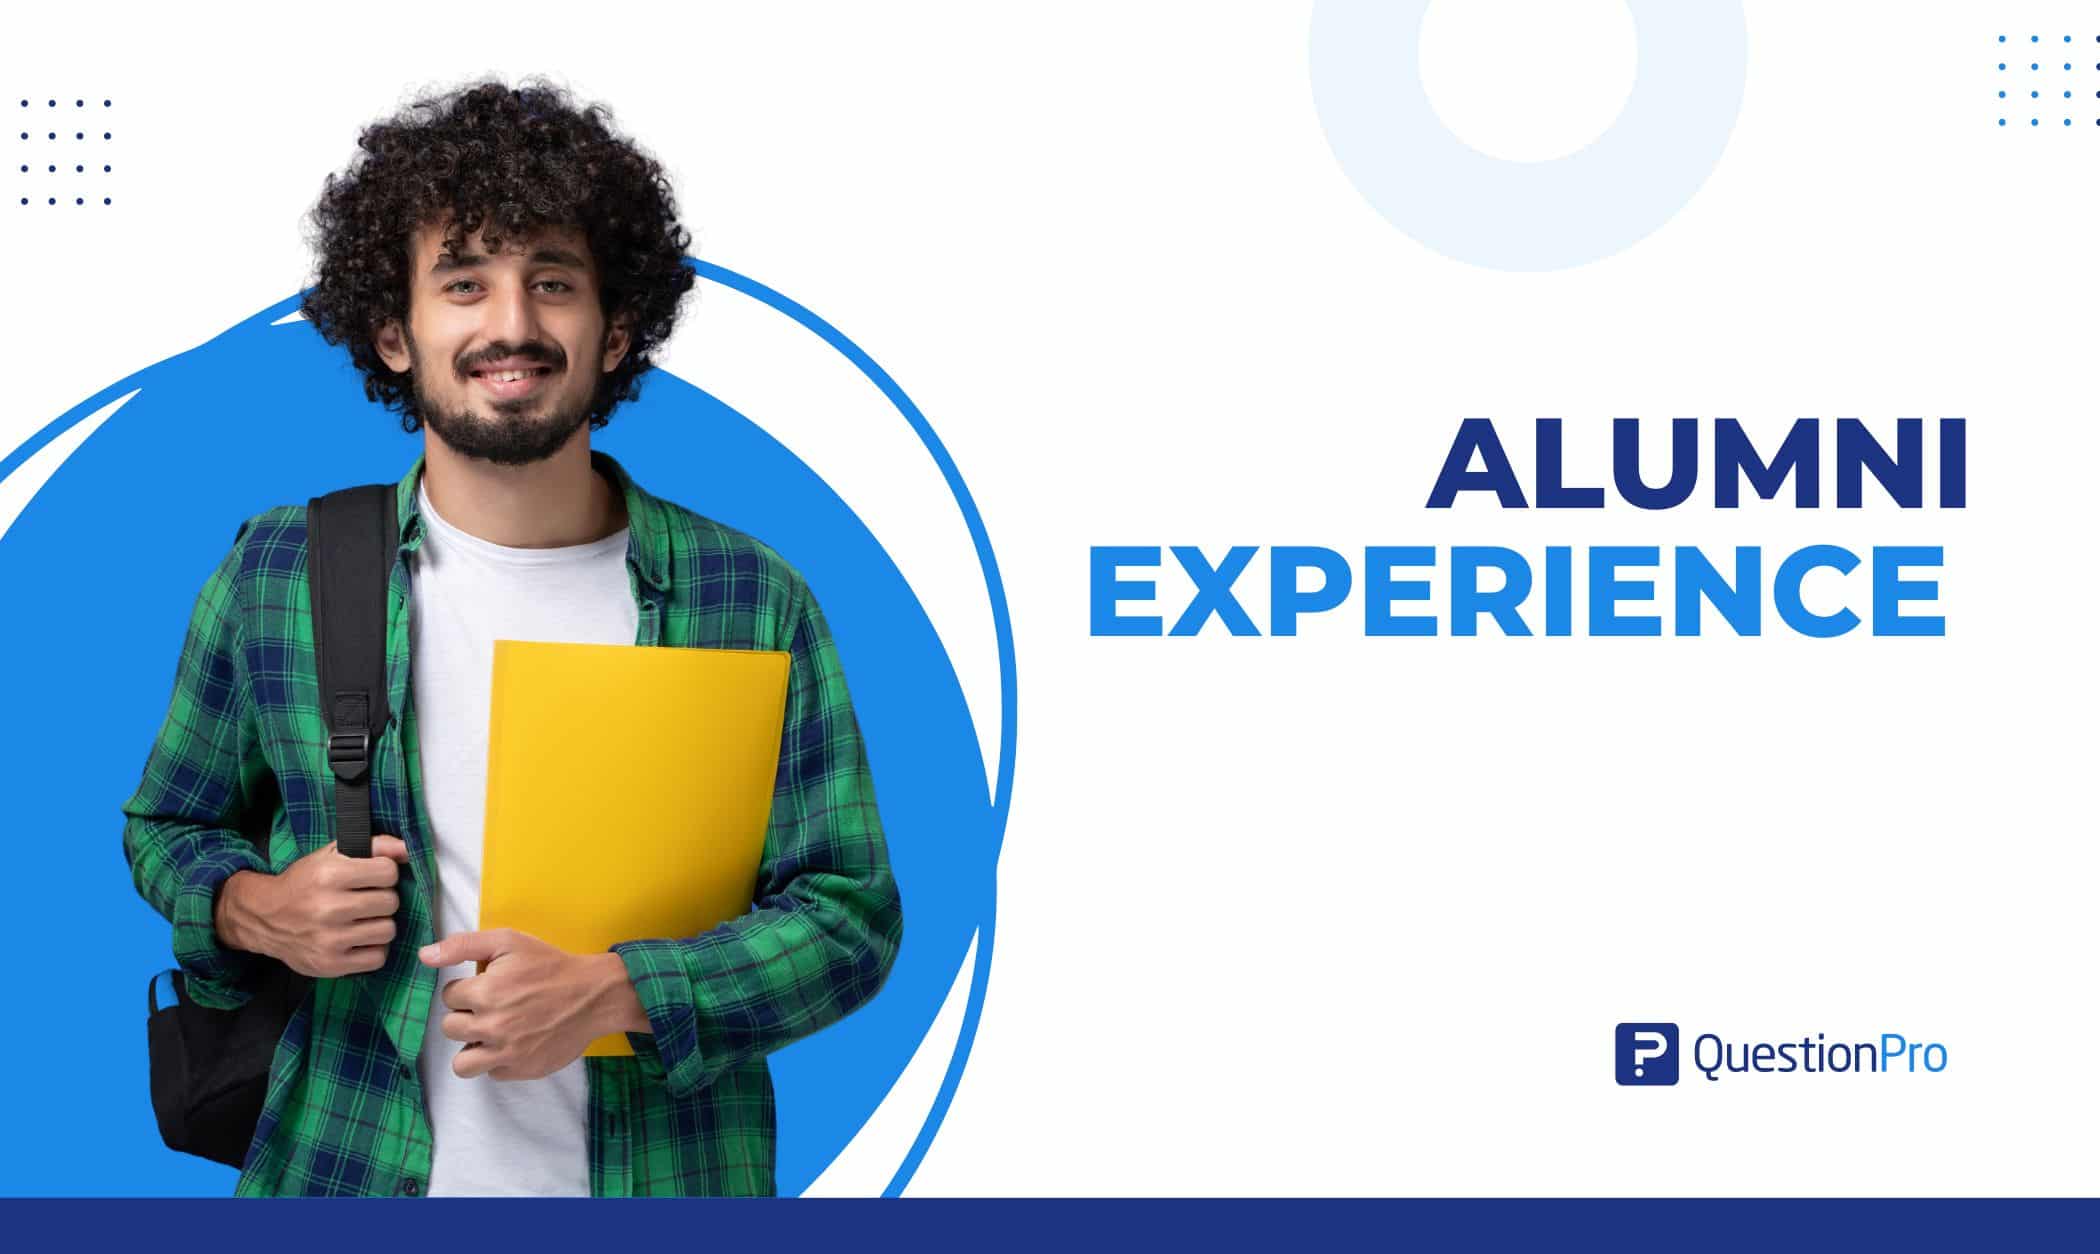 The Alumni experience is designed to generate feedback from Alumni to assess outcomes on several dimensions. Let's learn more about it.